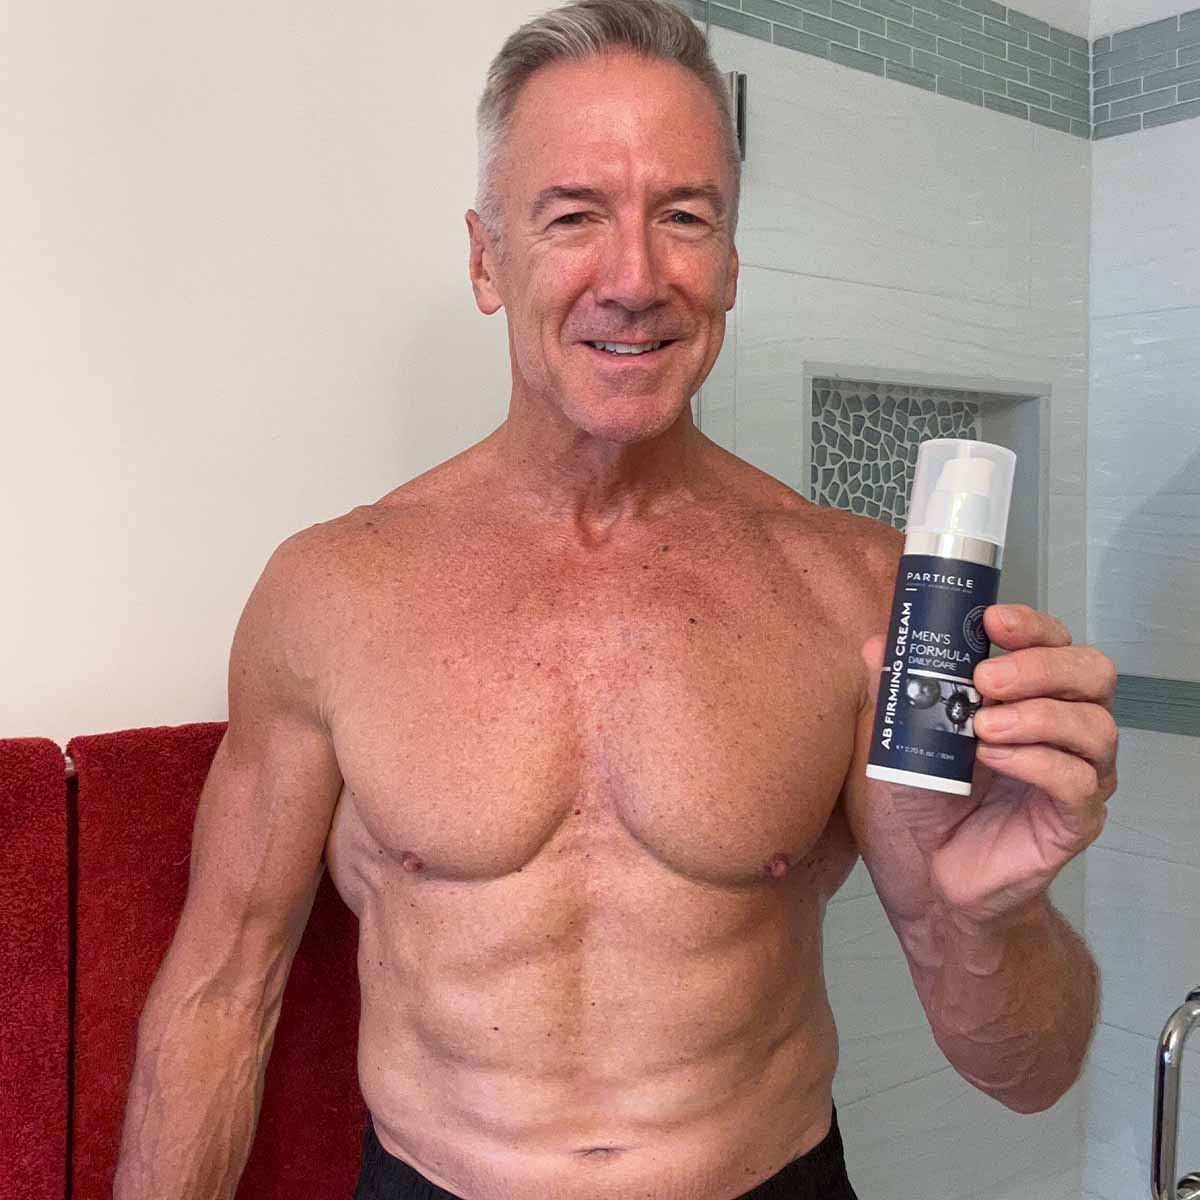 Muscular man holding a bottle Particle AB Firming Cream.